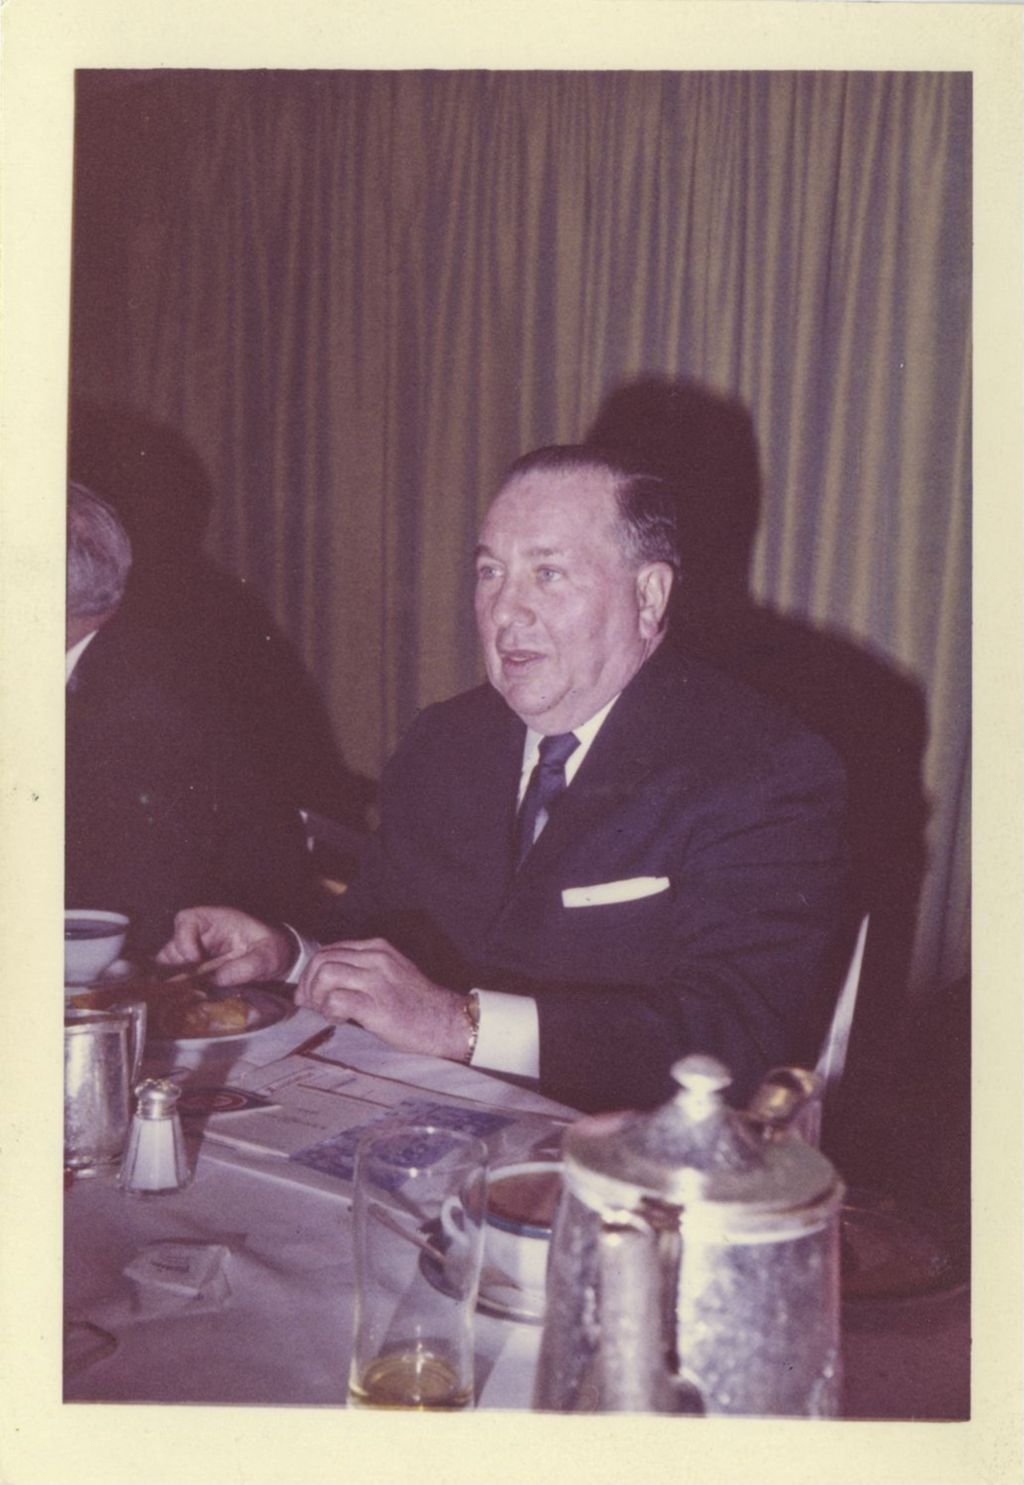 Old Timers' Baseball Association of Chicago 45th Annual dinner, Richard J. Daley